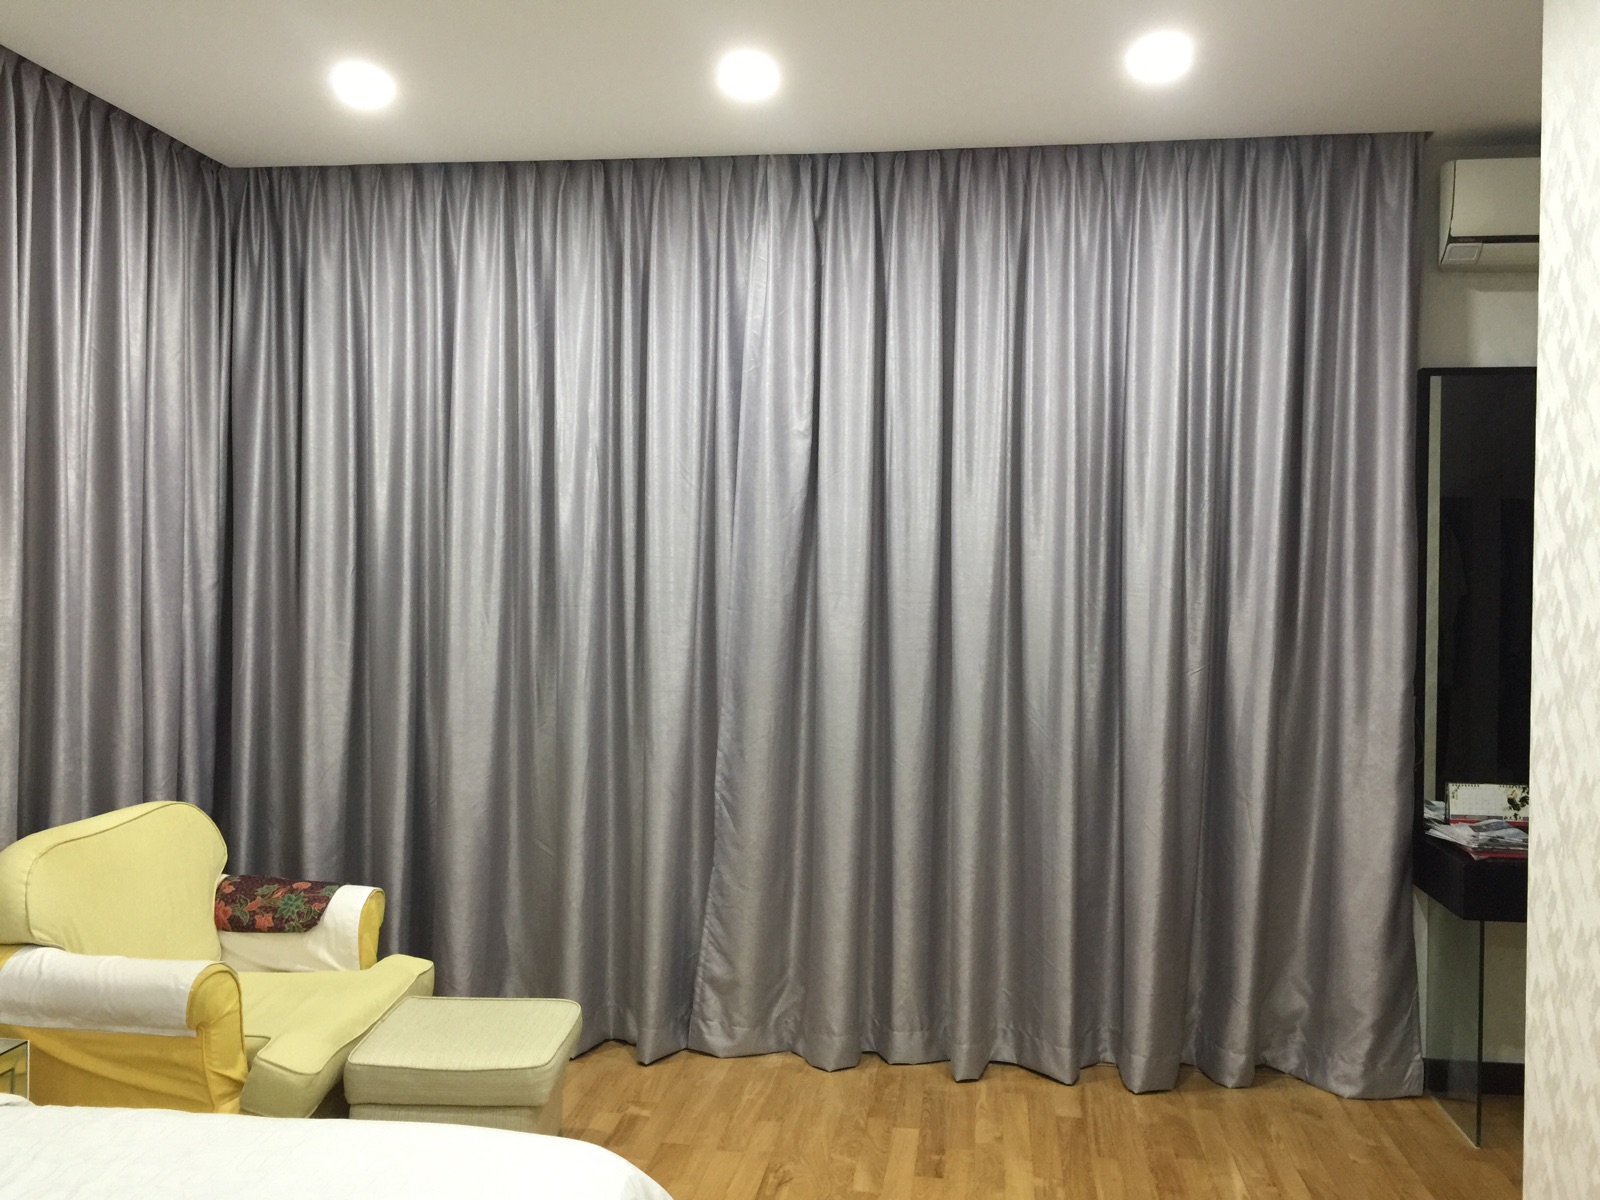 Hotel Curtain Standard Cater For Jb & Singapore Customer